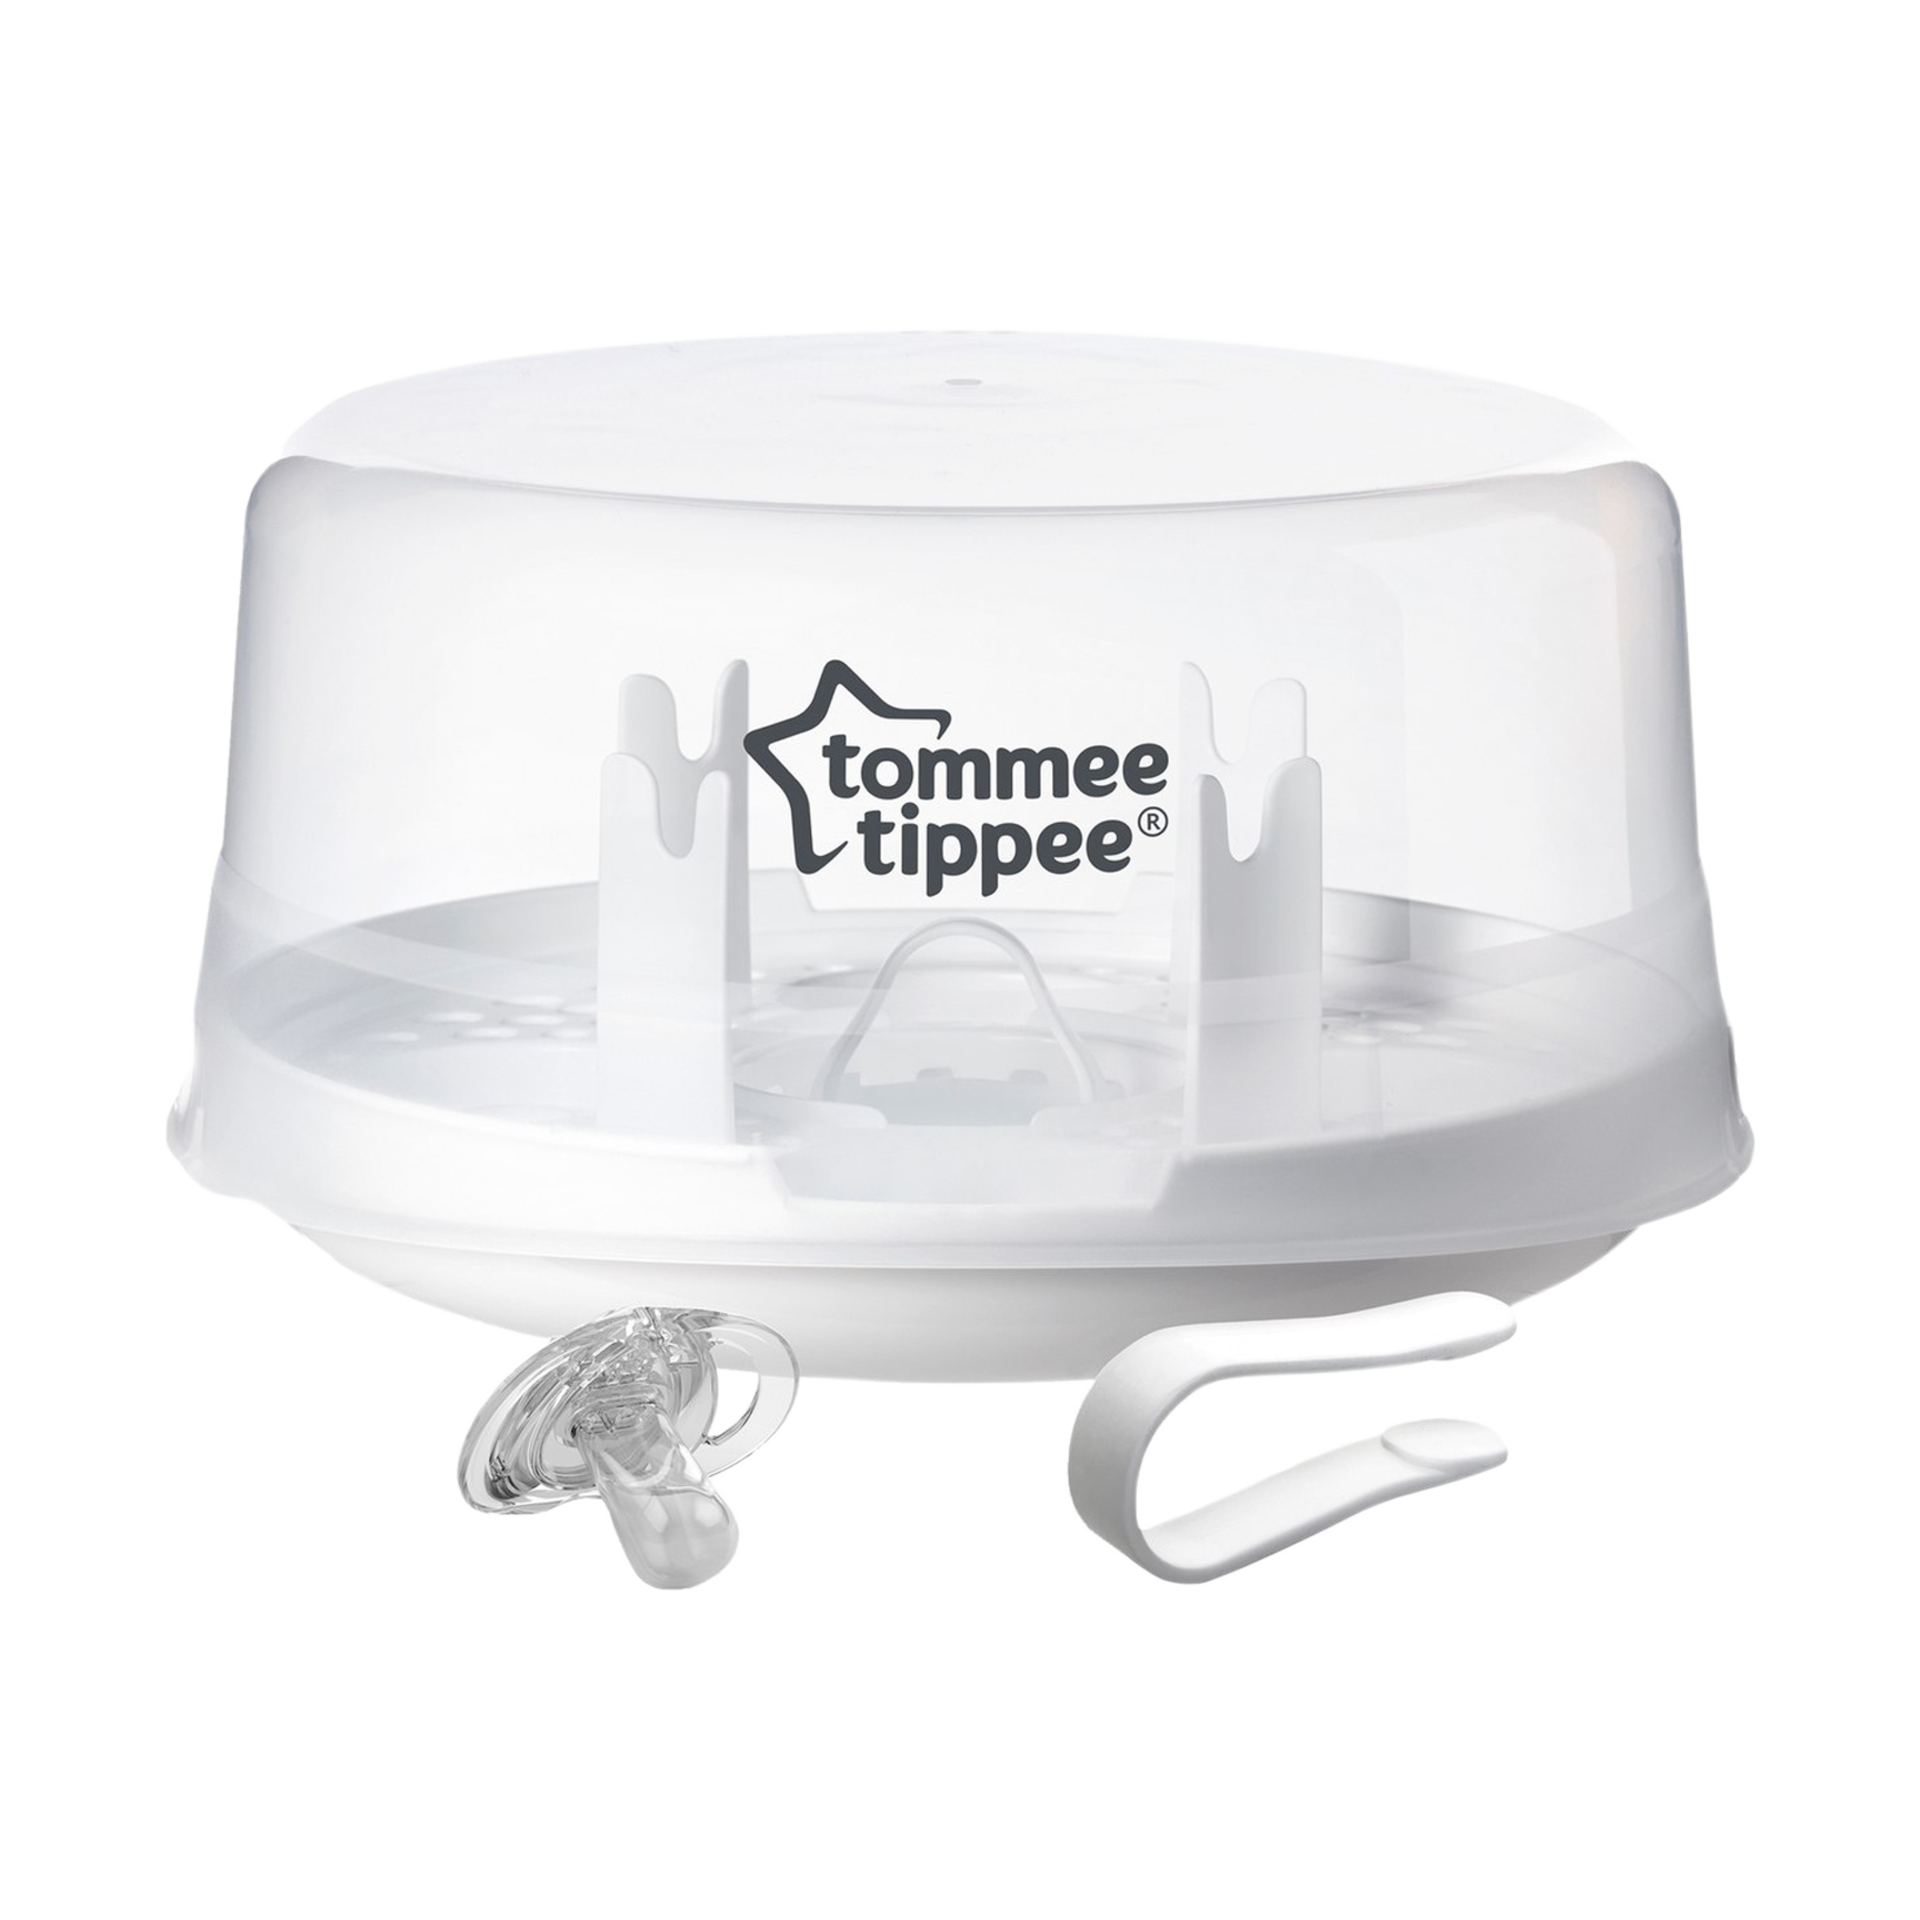 tommee tippee electric steam baby bottle sterilizer